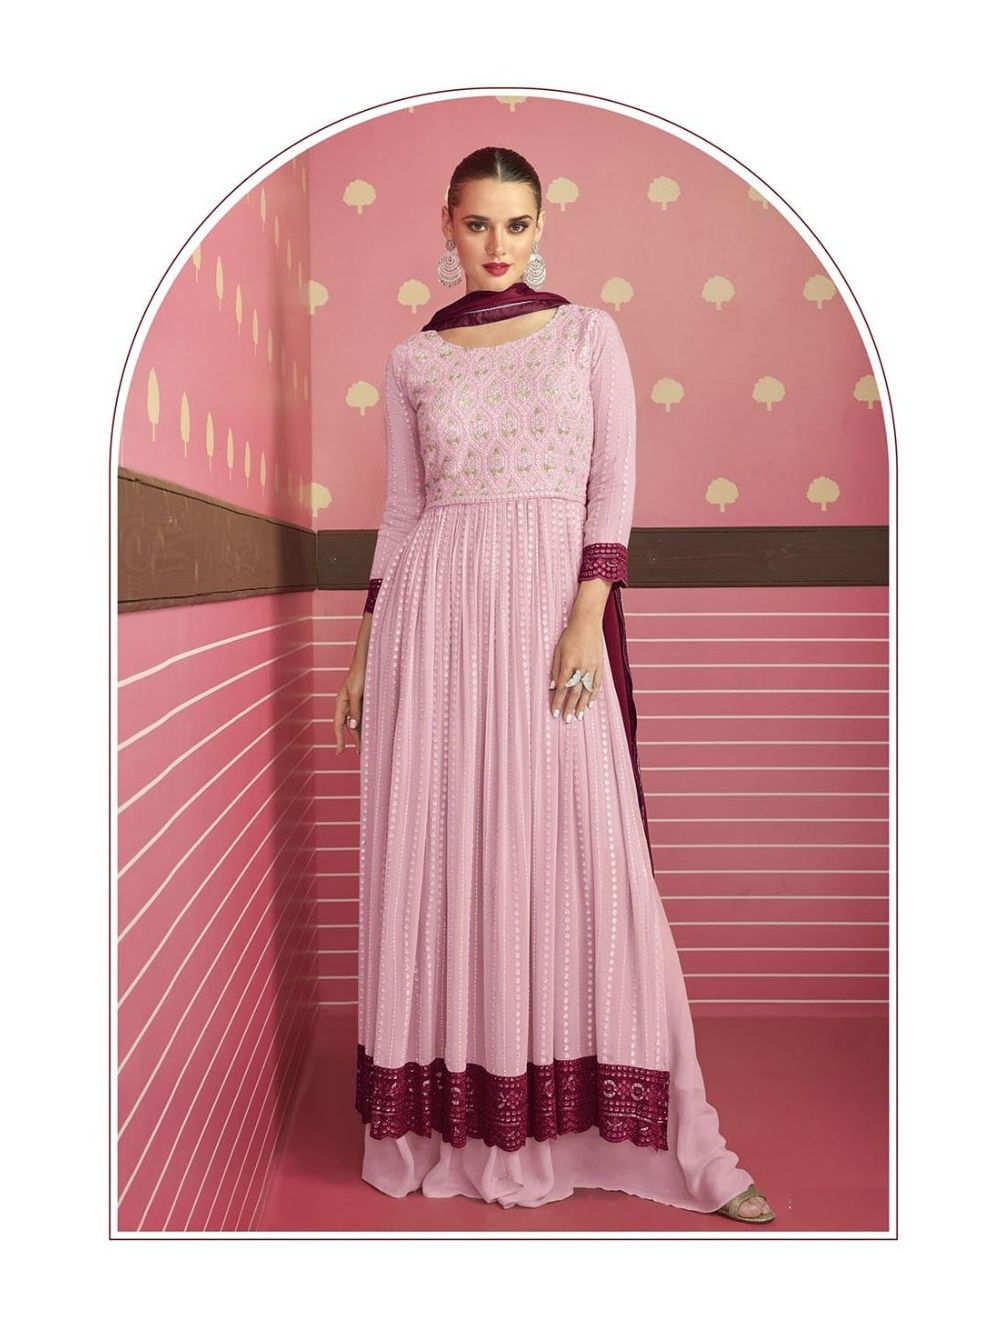 Naira Cut Gown With Dupatta And Pant.Same As Shown In Photo Guranteed.